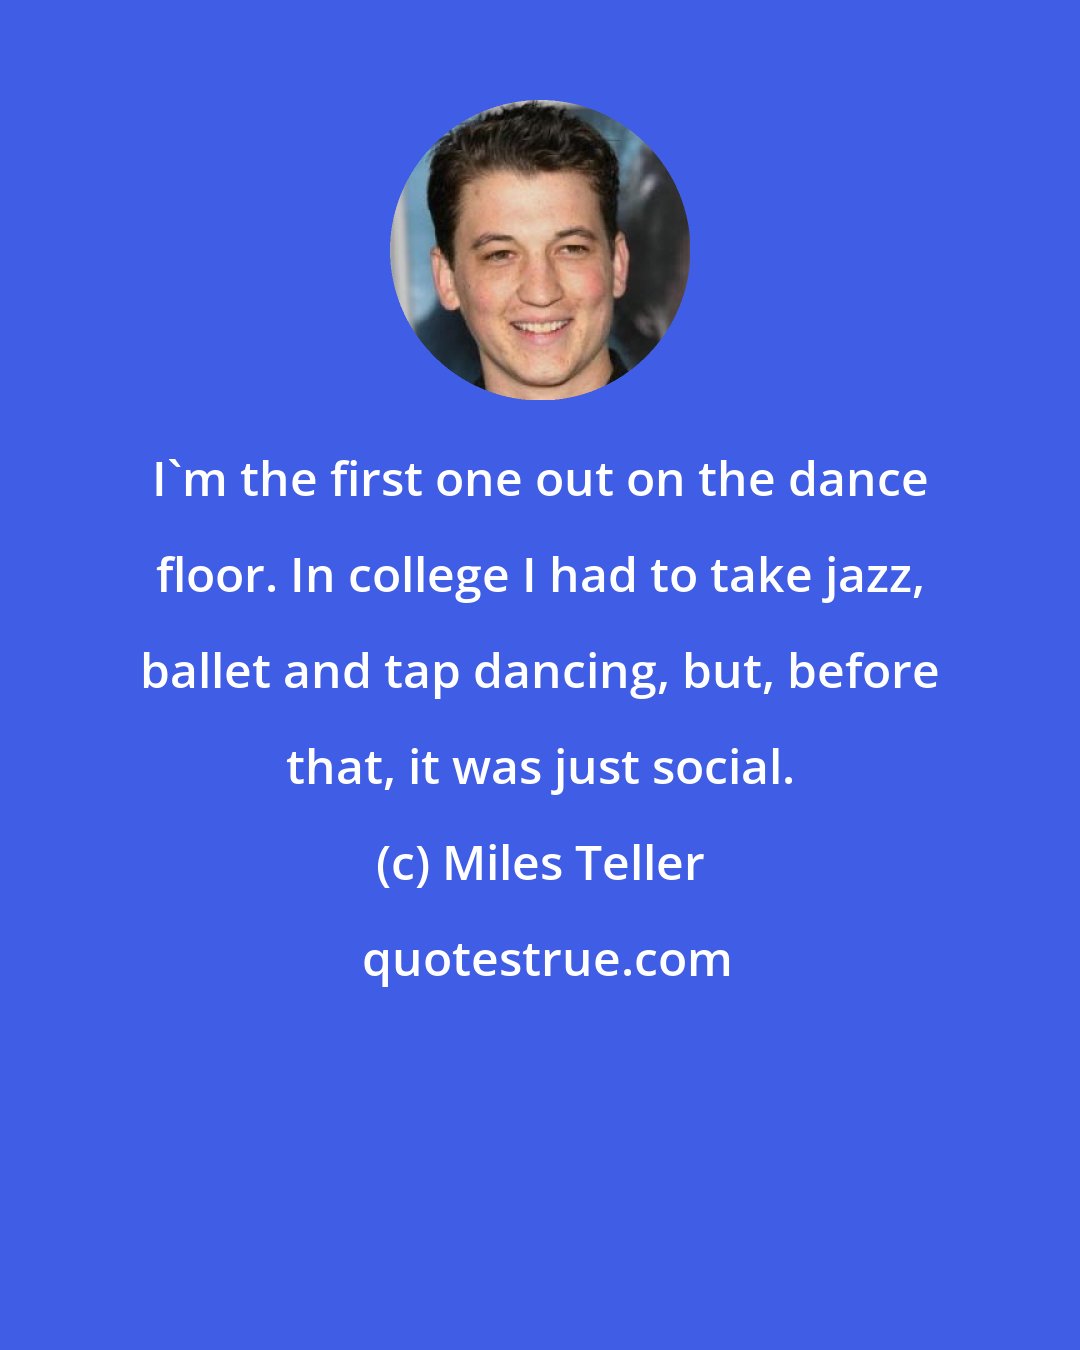 Miles Teller: I'm the first one out on the dance floor. In college I had to take jazz, ballet and tap dancing, but, before that, it was just social.